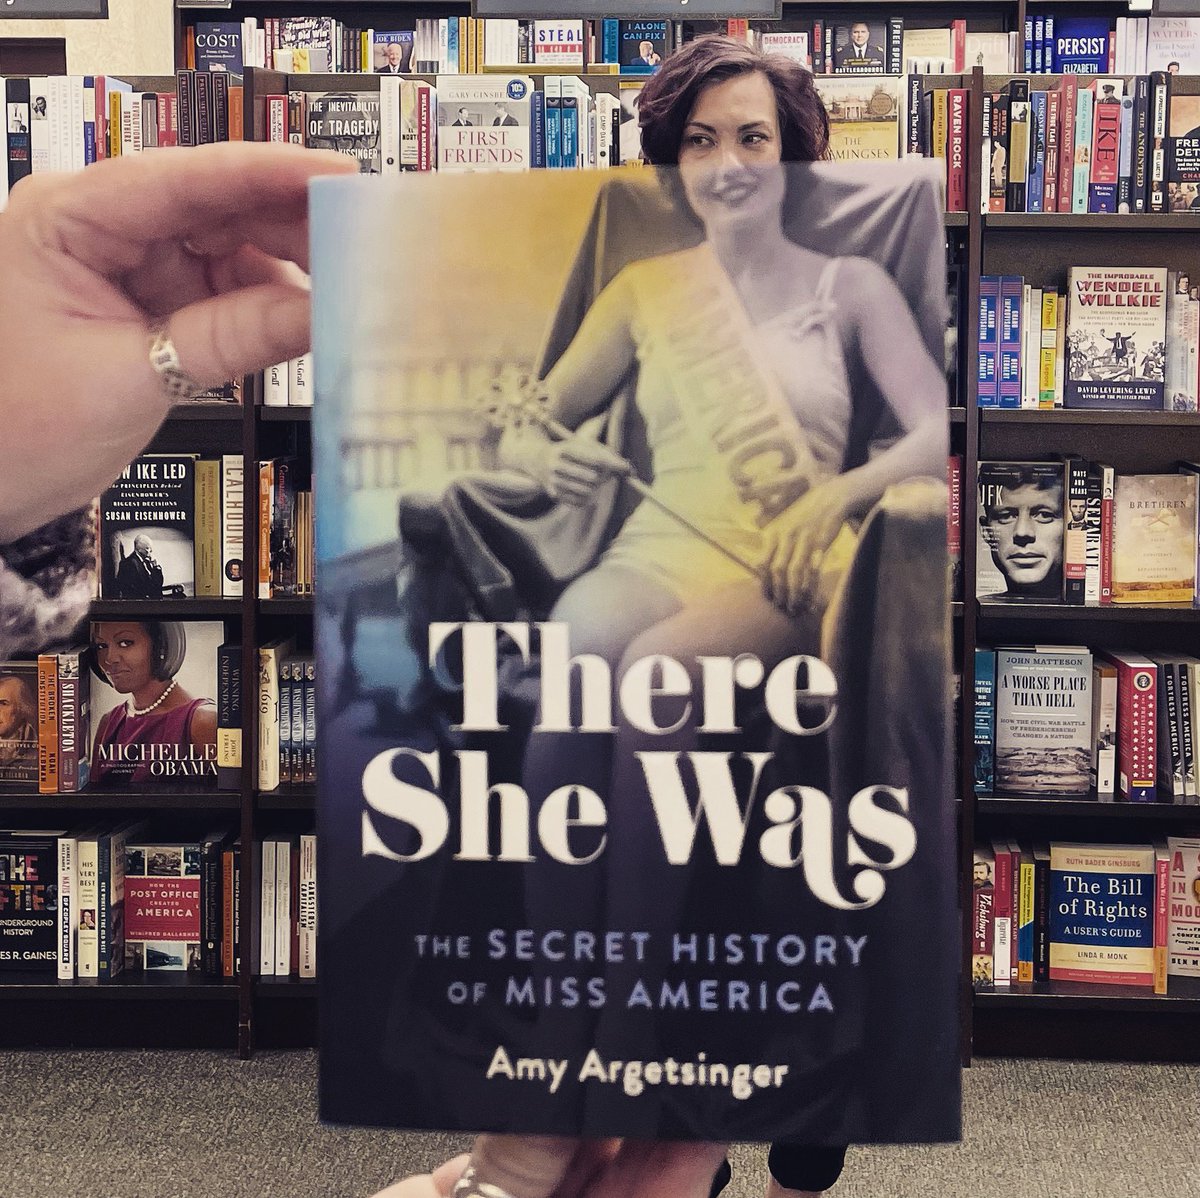 It’s #bookfacefriday #historynerds ! Take a fascinating look back on the last 100 years of the Miss America pageant. The turmoil, the scandal, the tears! 🫣😭😱 📚♥️ #bn #bnbuzz #mybn #historybooks #herstory #womenshistory #womensstudies #missamerica #bookface #bookfacelicious